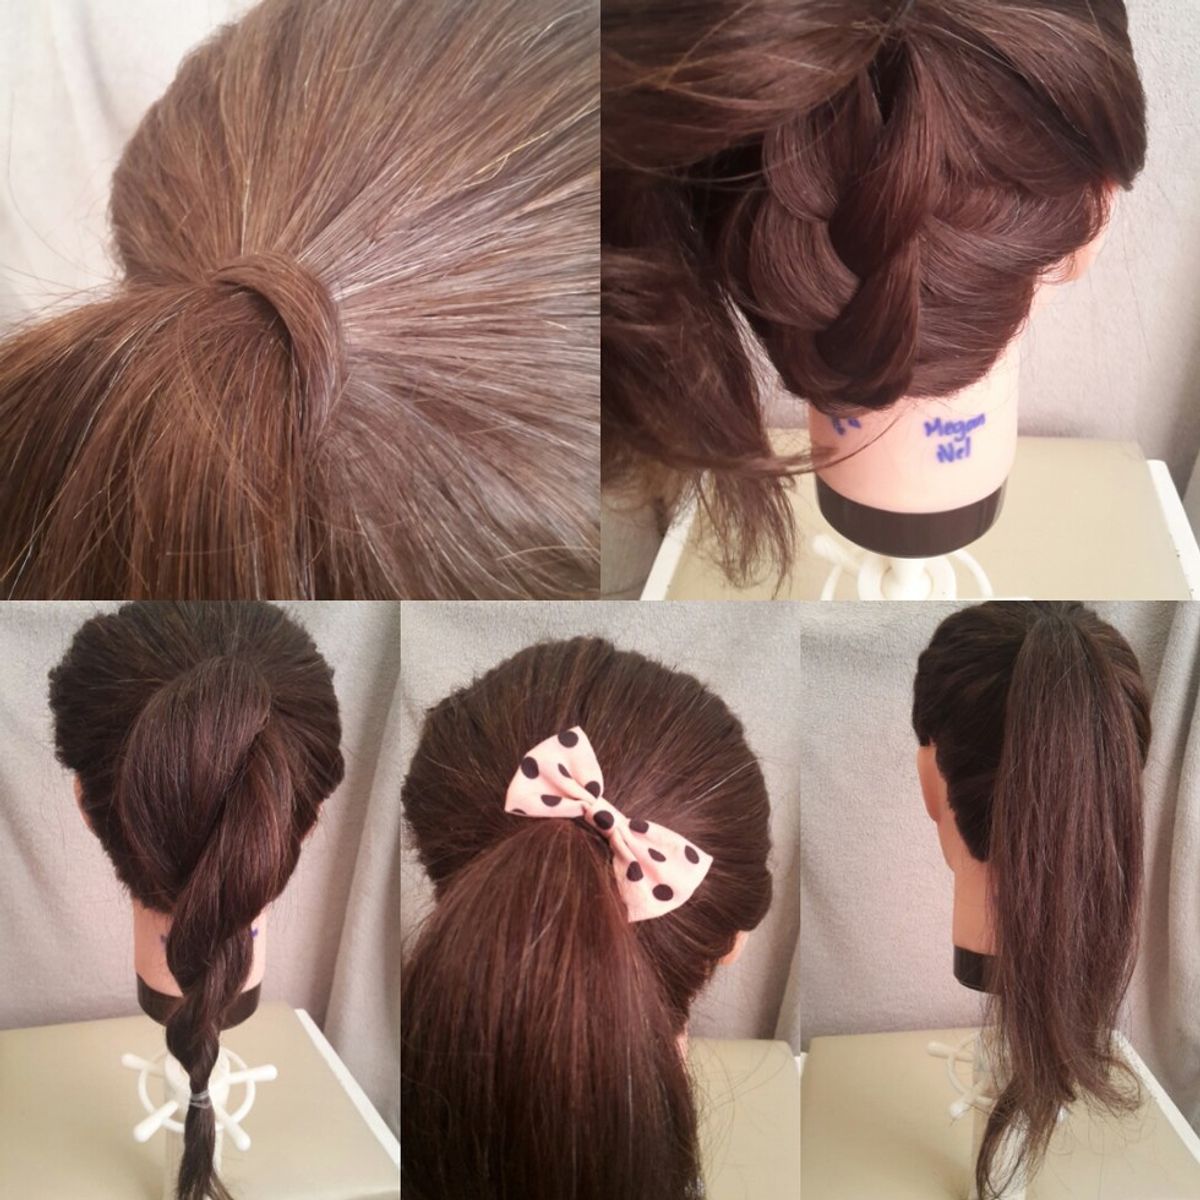 Five Ways To Spice Up Your Ponytail